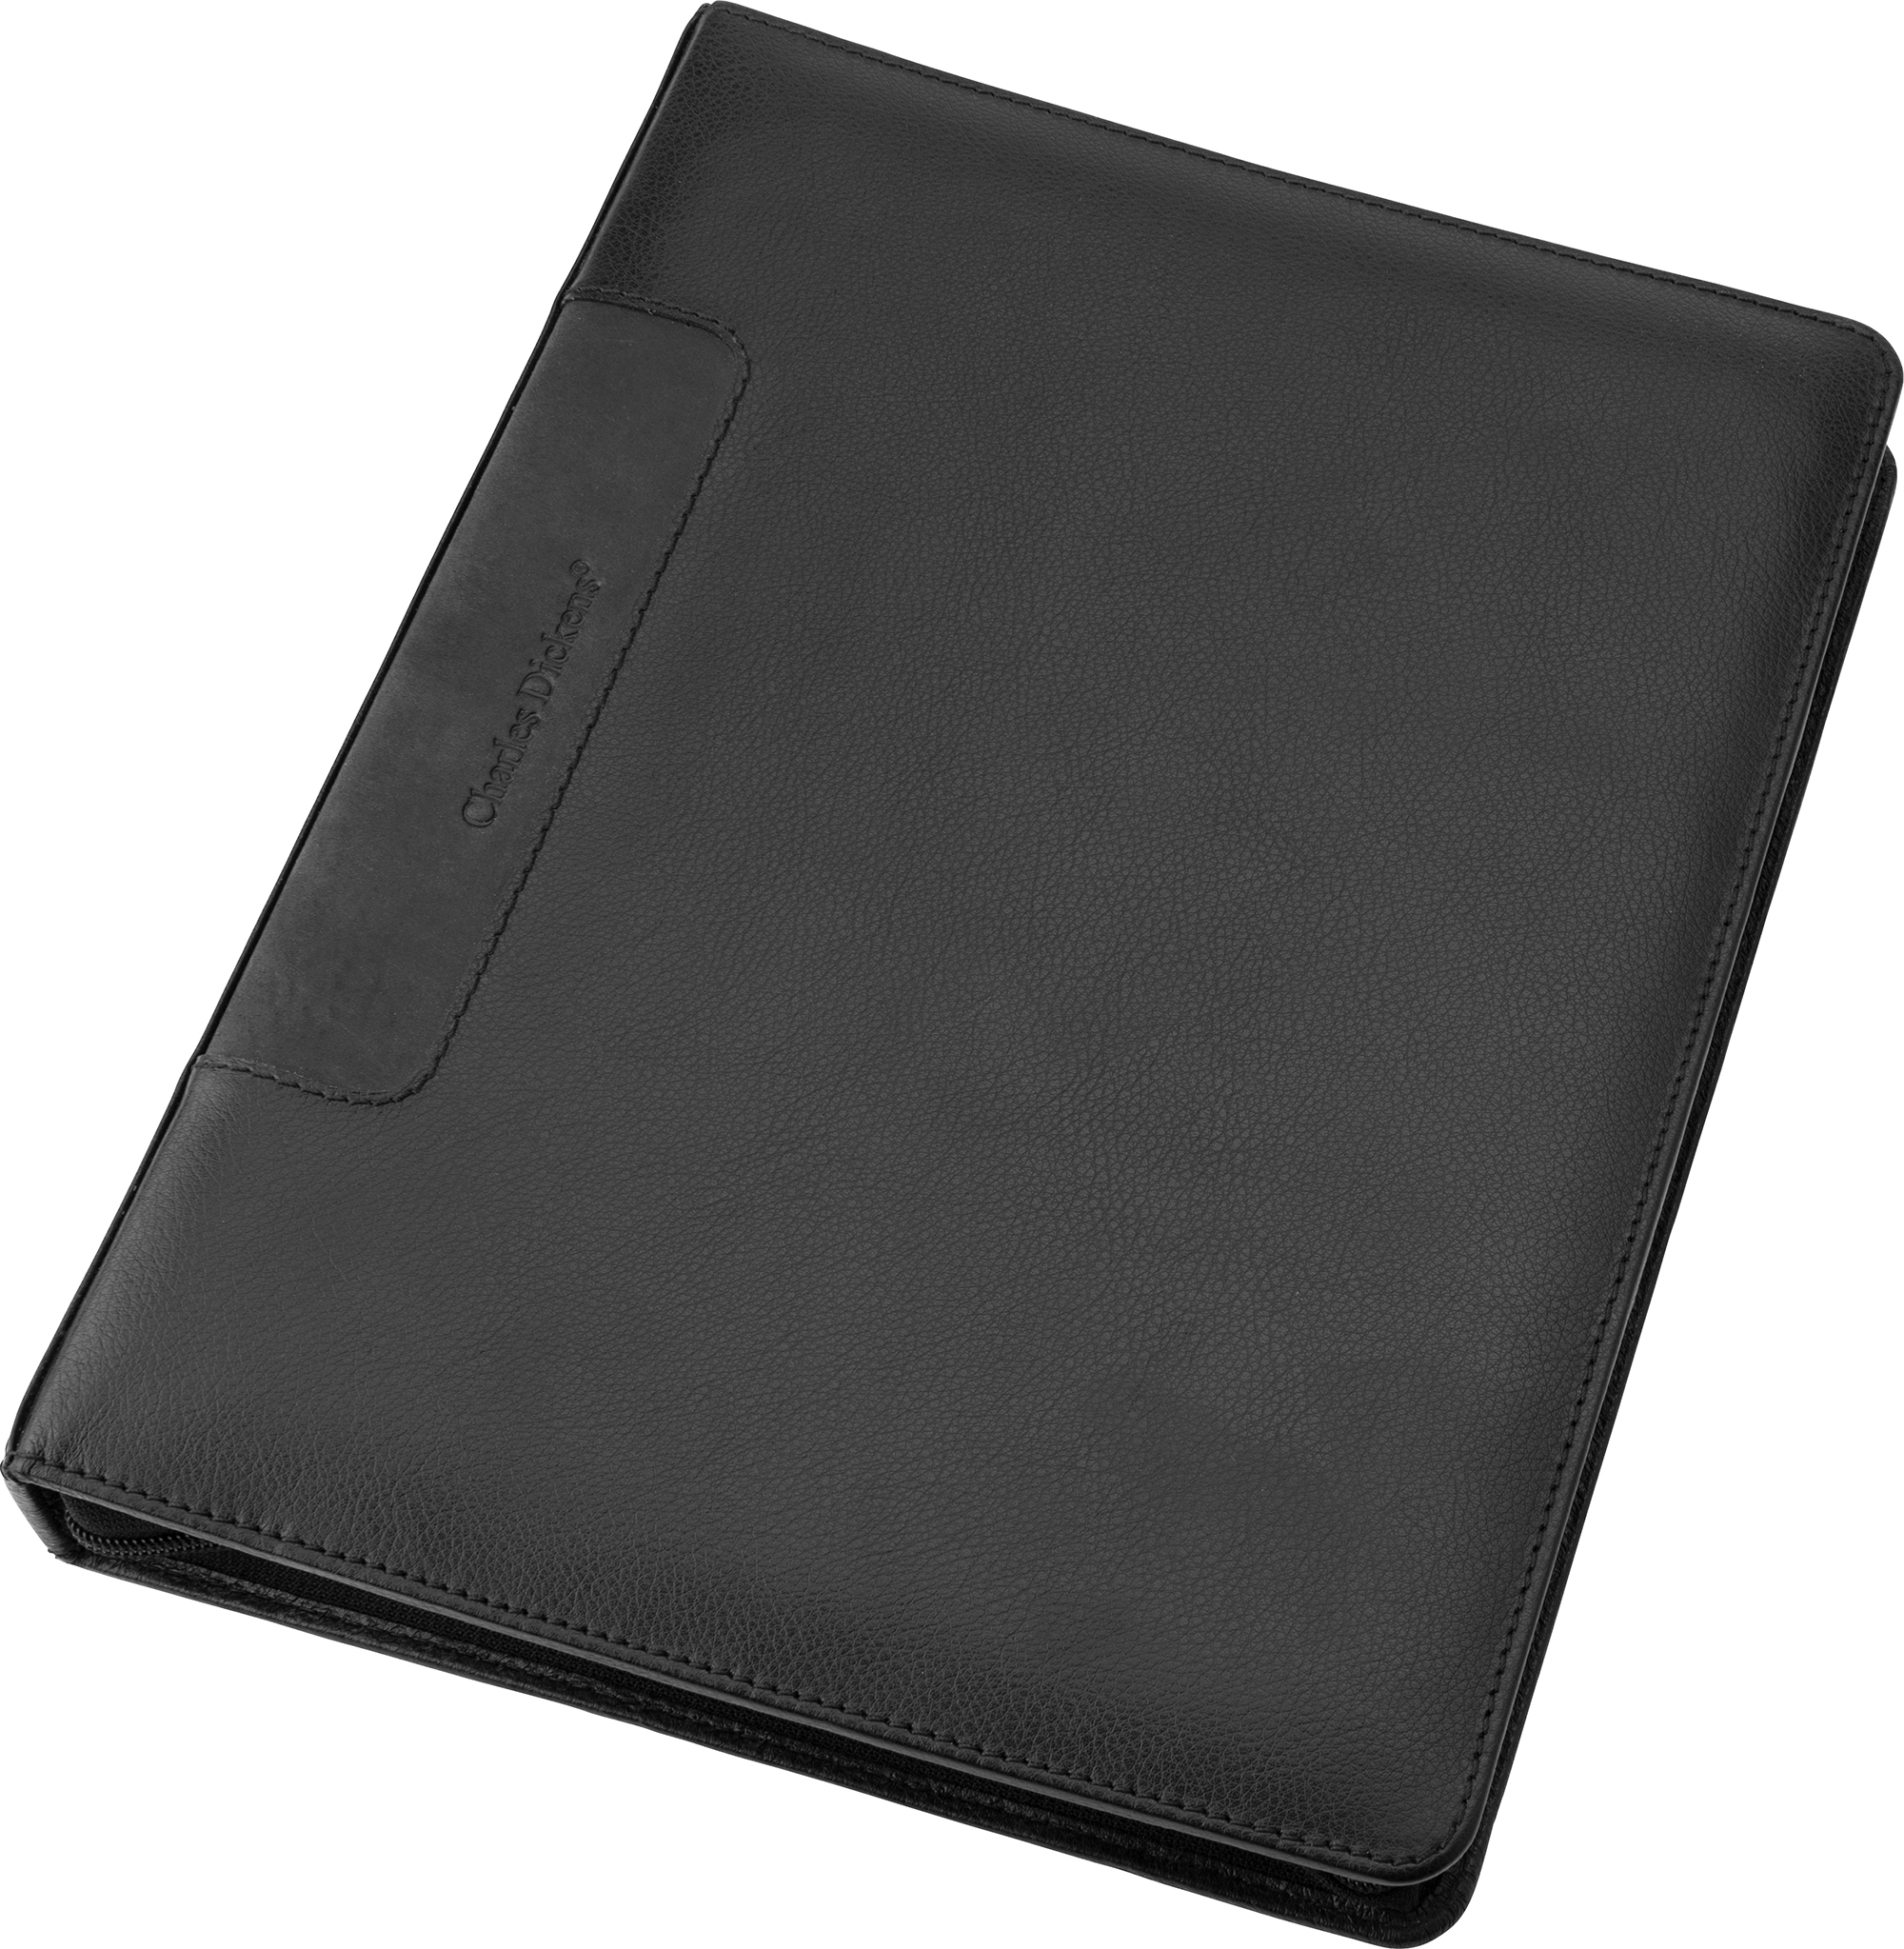 Branded Leather Charles Dickens A4 zipped folder